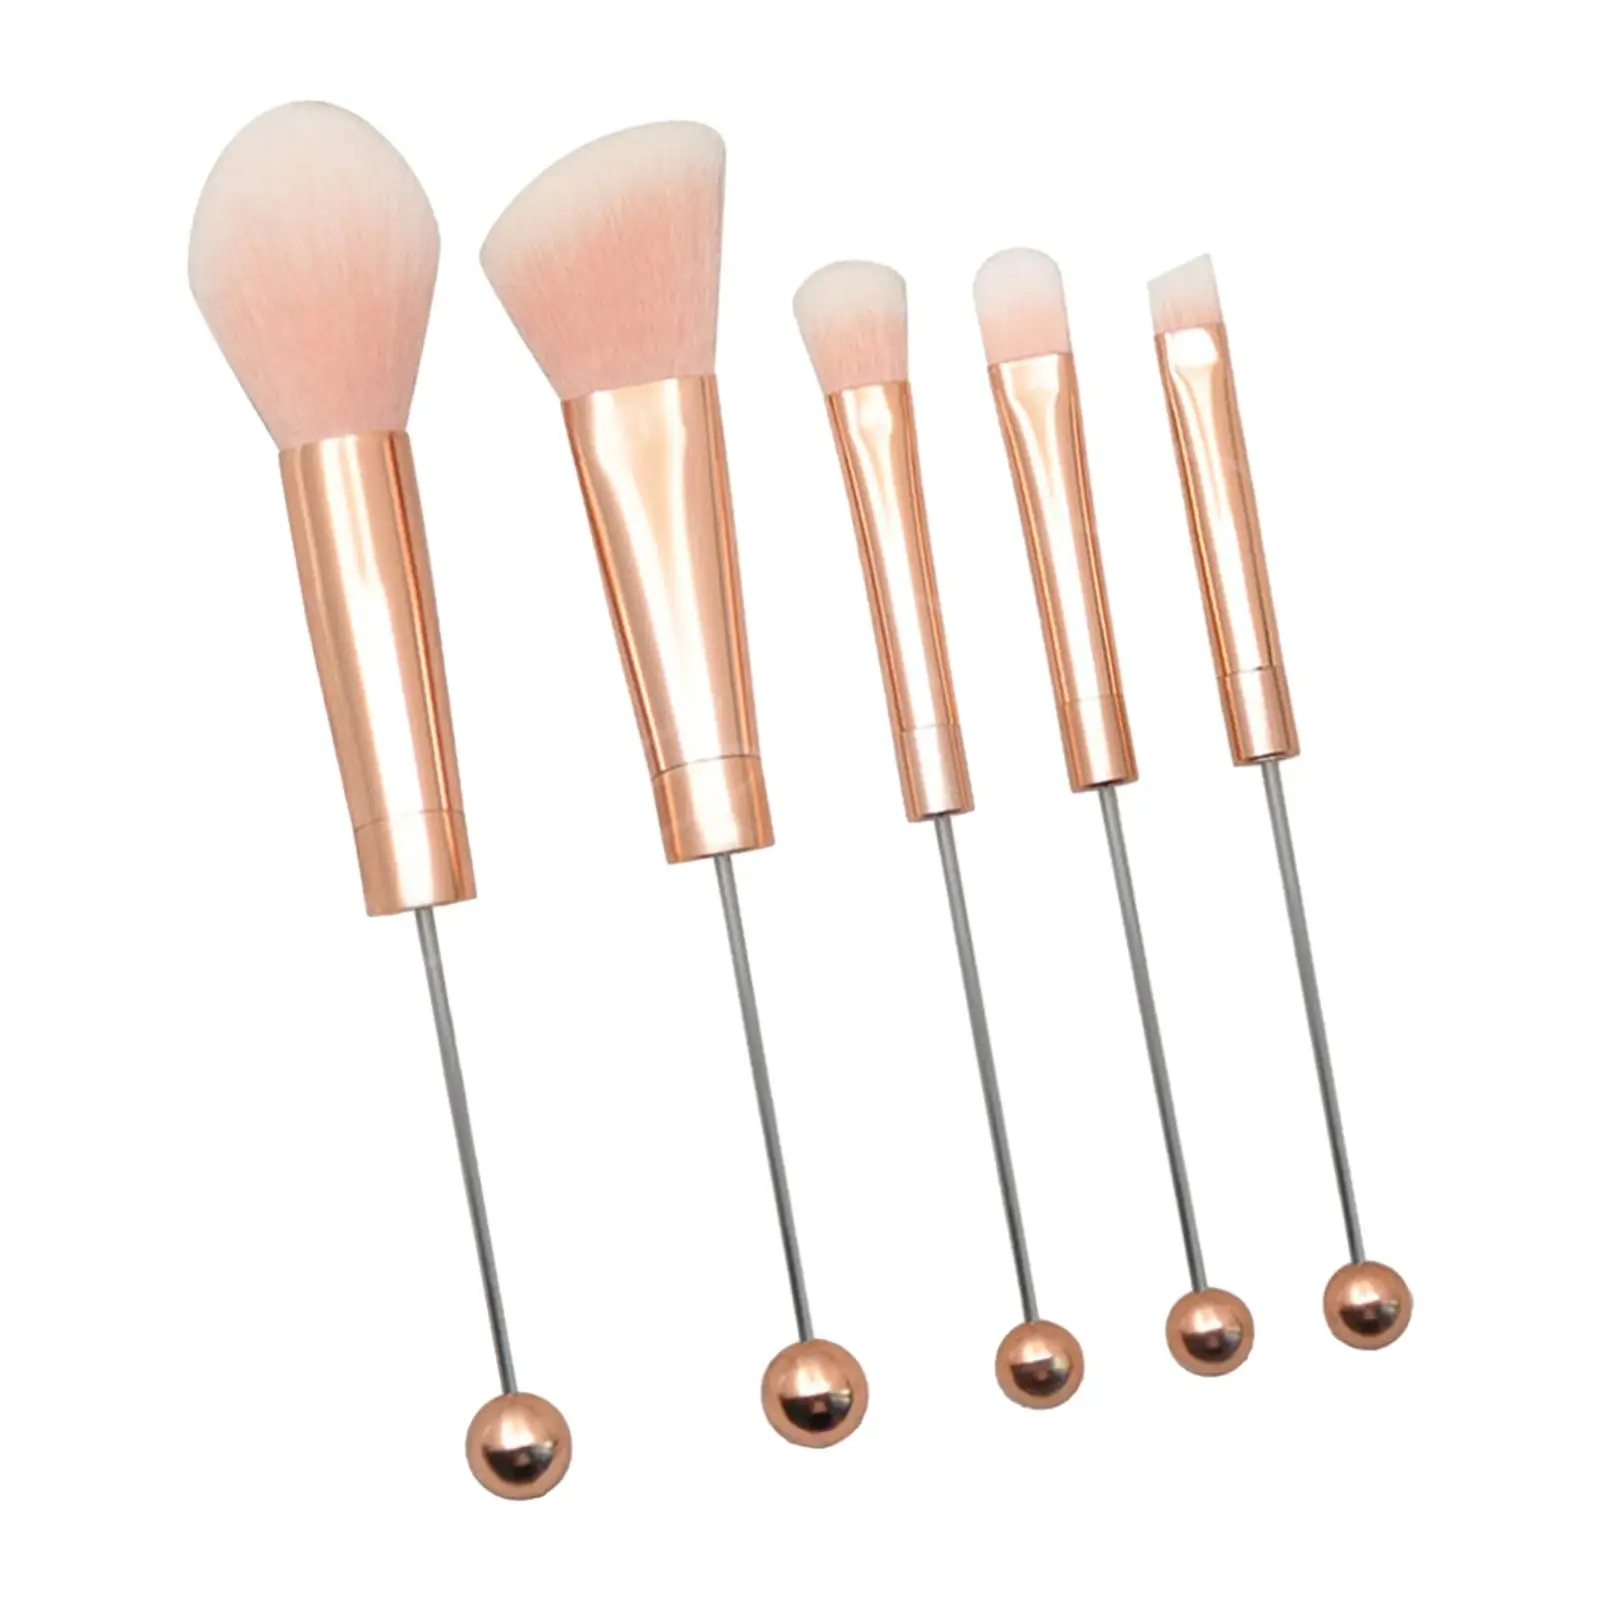 5x Makeup Brushes Set Aluminum Tube Face Makeup Brush Kits Cosmetic Brushes for Bestie Girlfriend Adults Sister Birthday Gifts